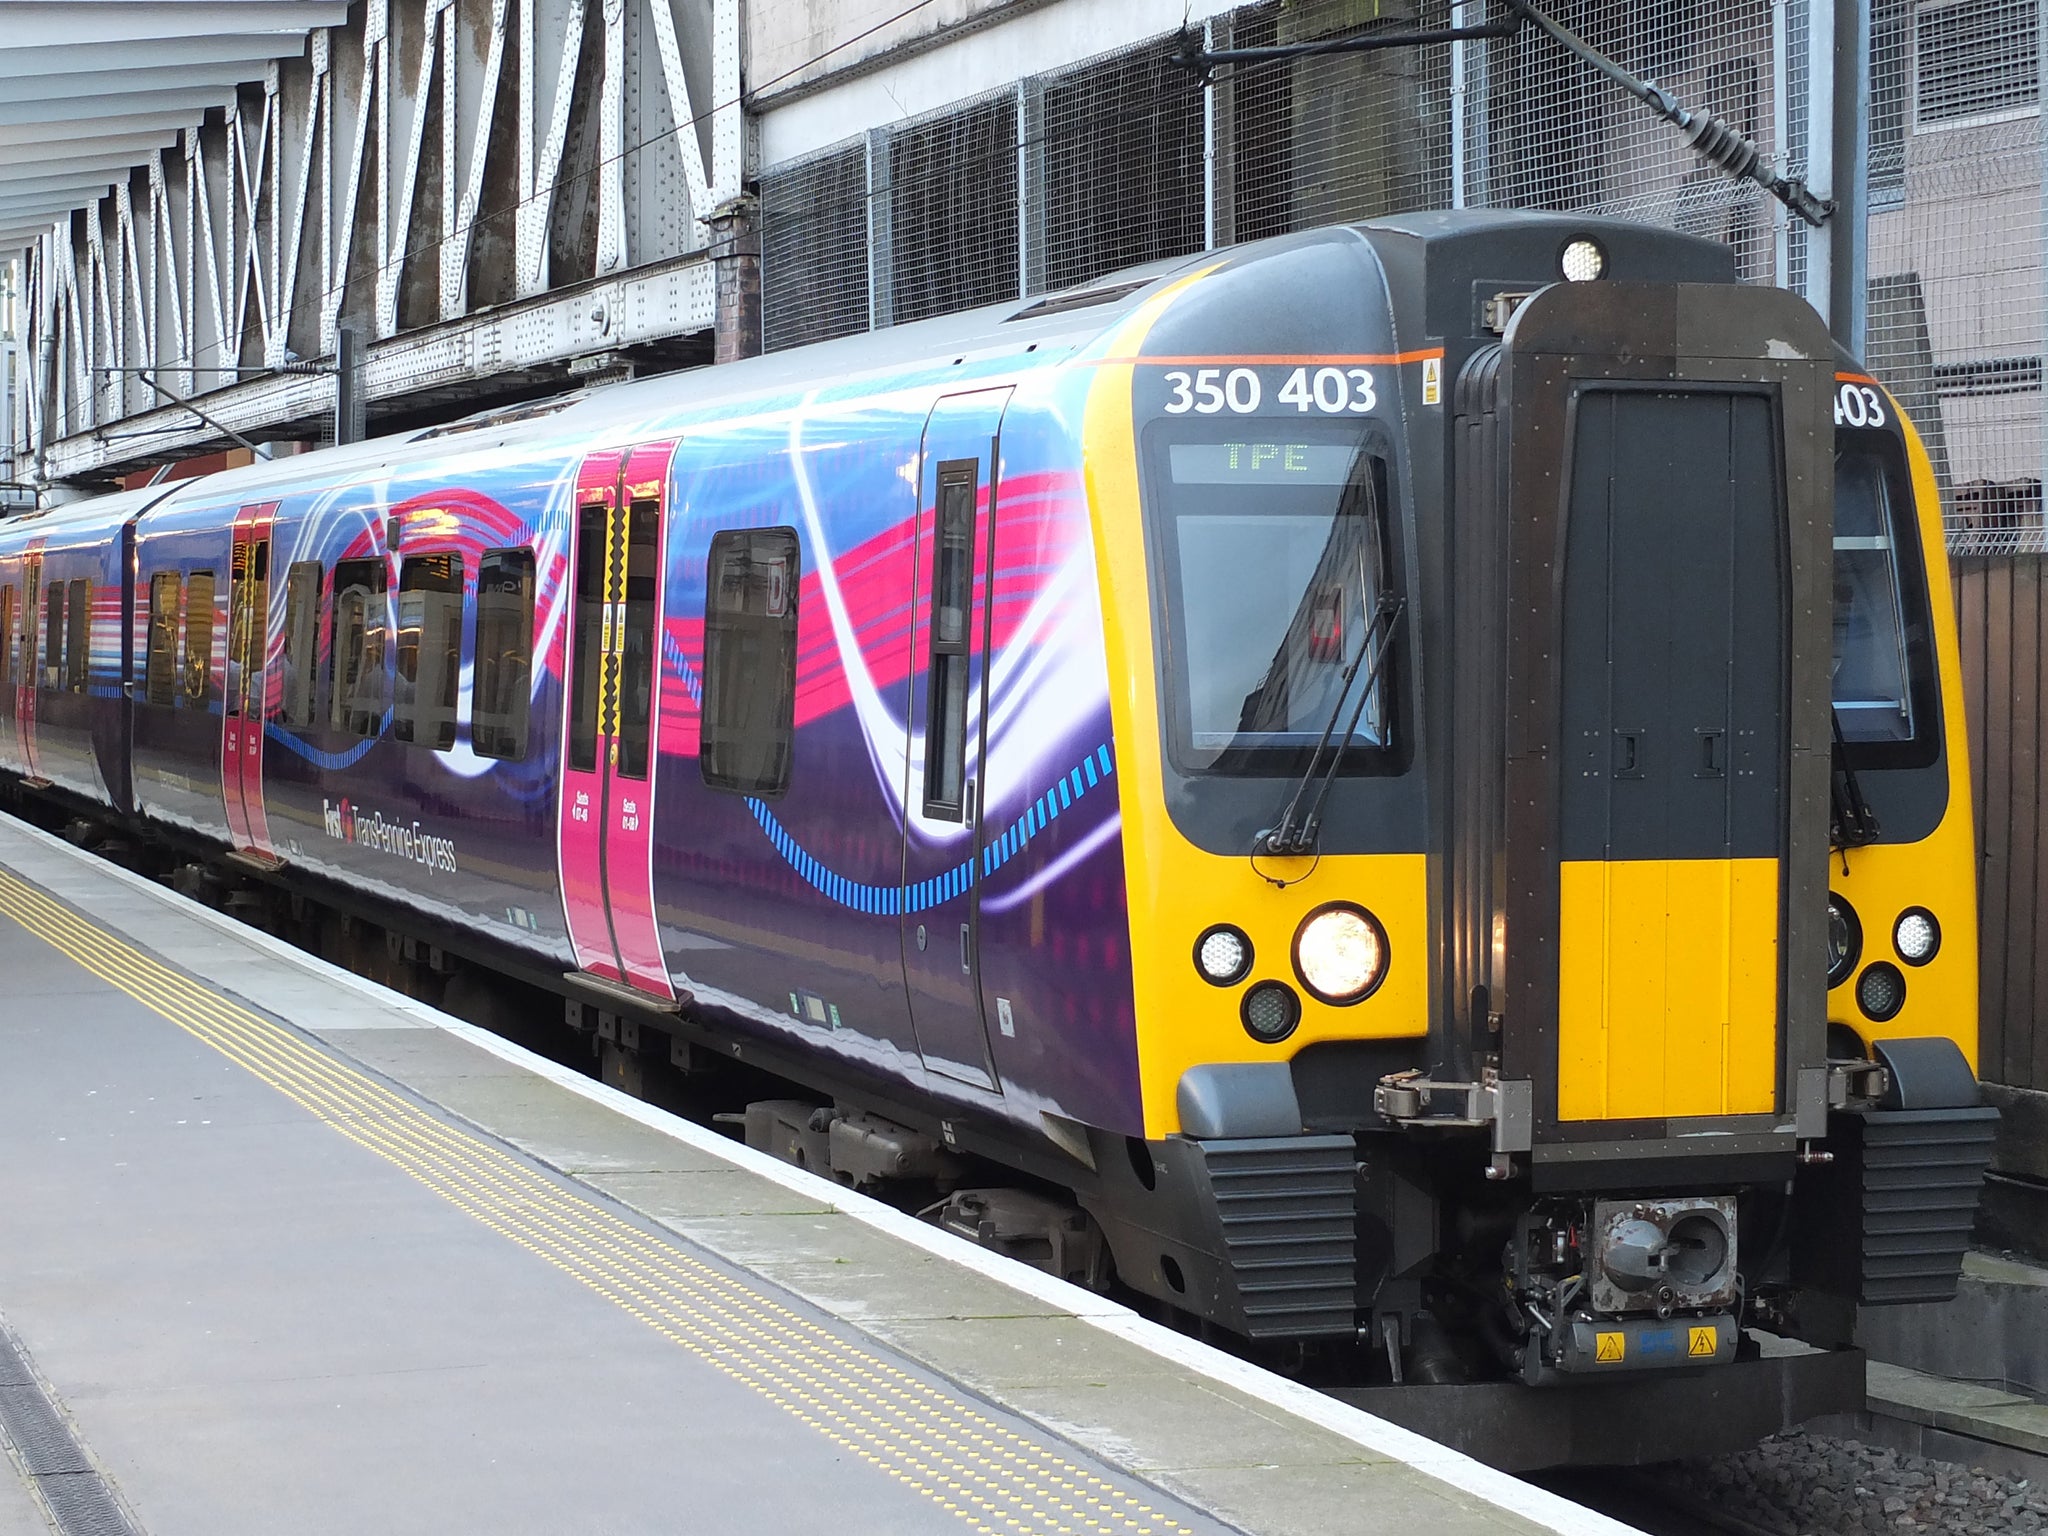 TransPennine Express: One of FirstGroup's rail franchises